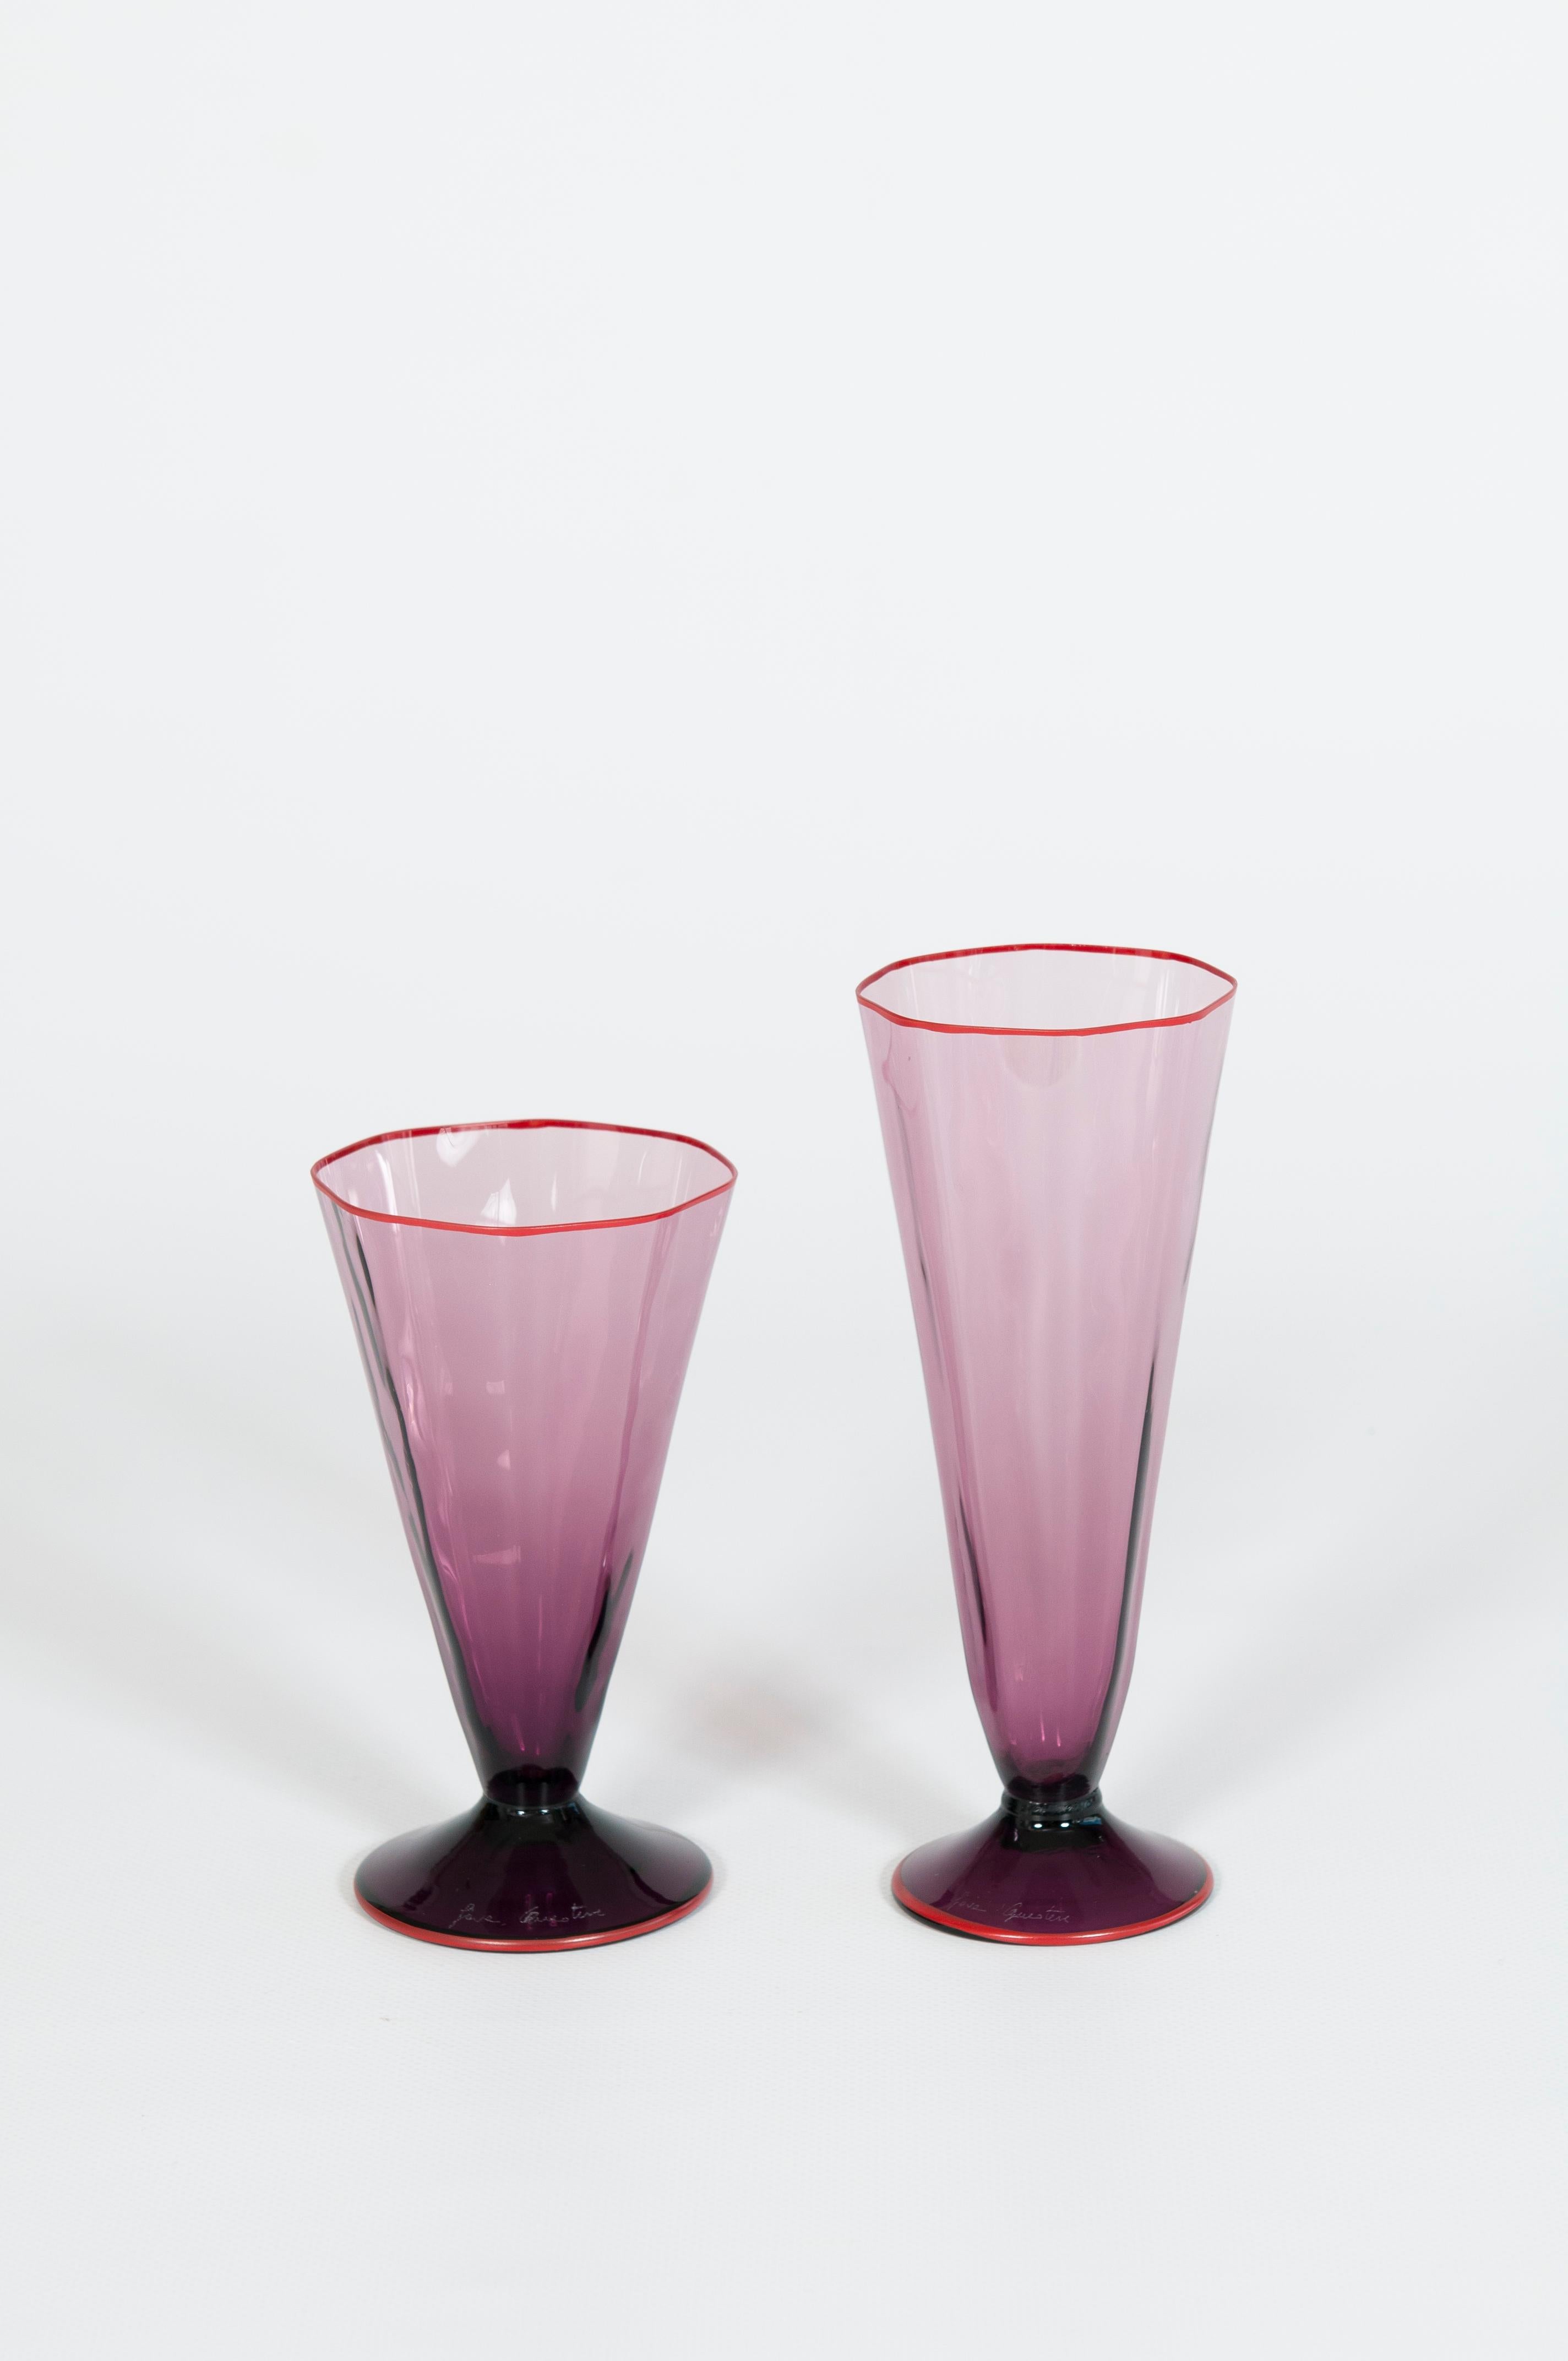 Stem Glasses' Pair in Amethyst Blown Murano Glass and Coral Borders Italy 1960s
The production of this unique pair of stem glasses dates back to the 1960s in Murano, the Venetian island famous for its unrivaled blown glass tradition. Entirely